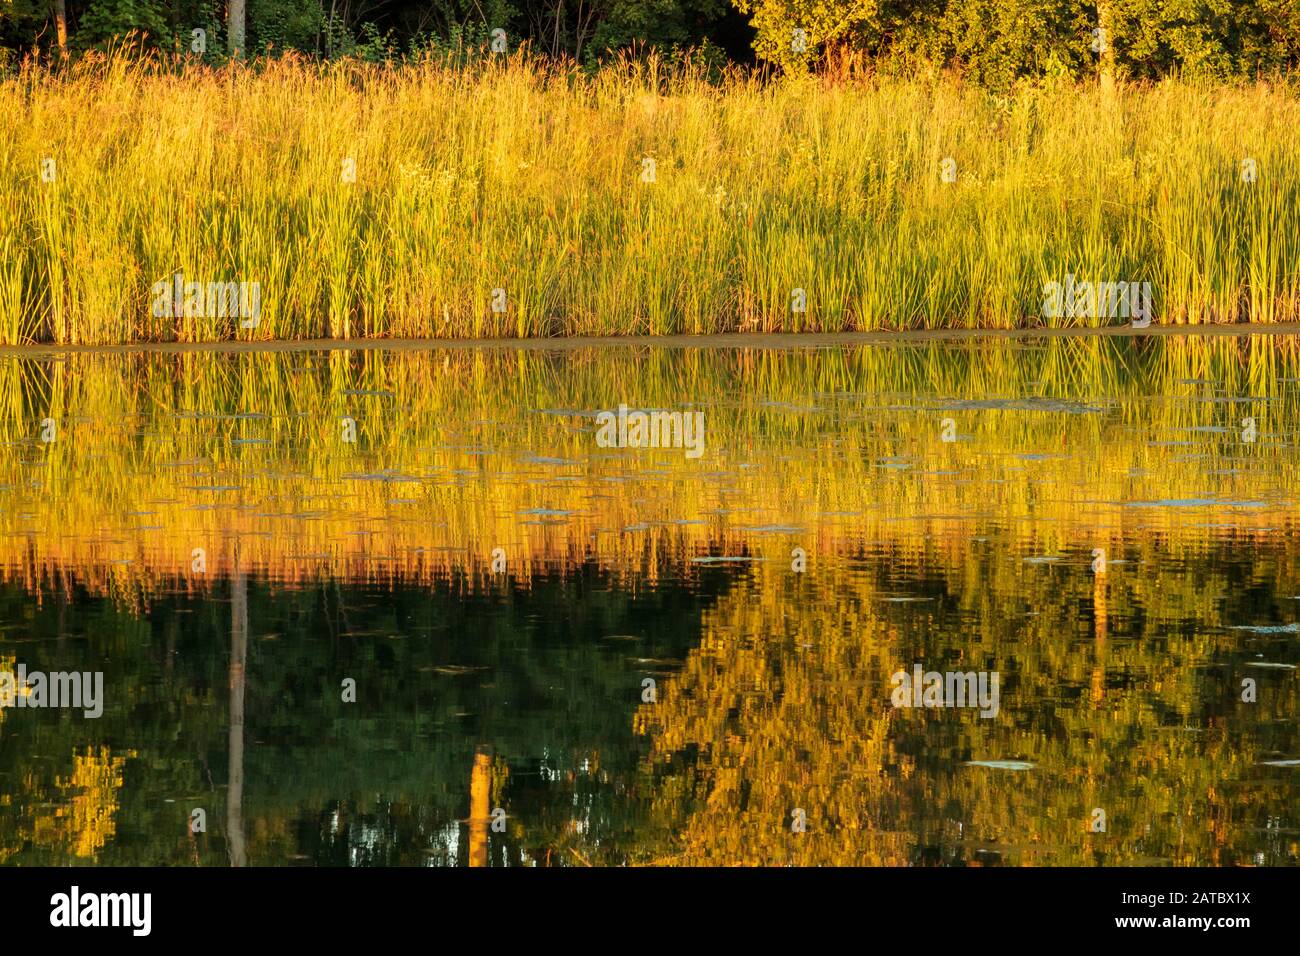 Sunset Reflection of Cattails in Pond at Elm Grove Village Park Stock Photo